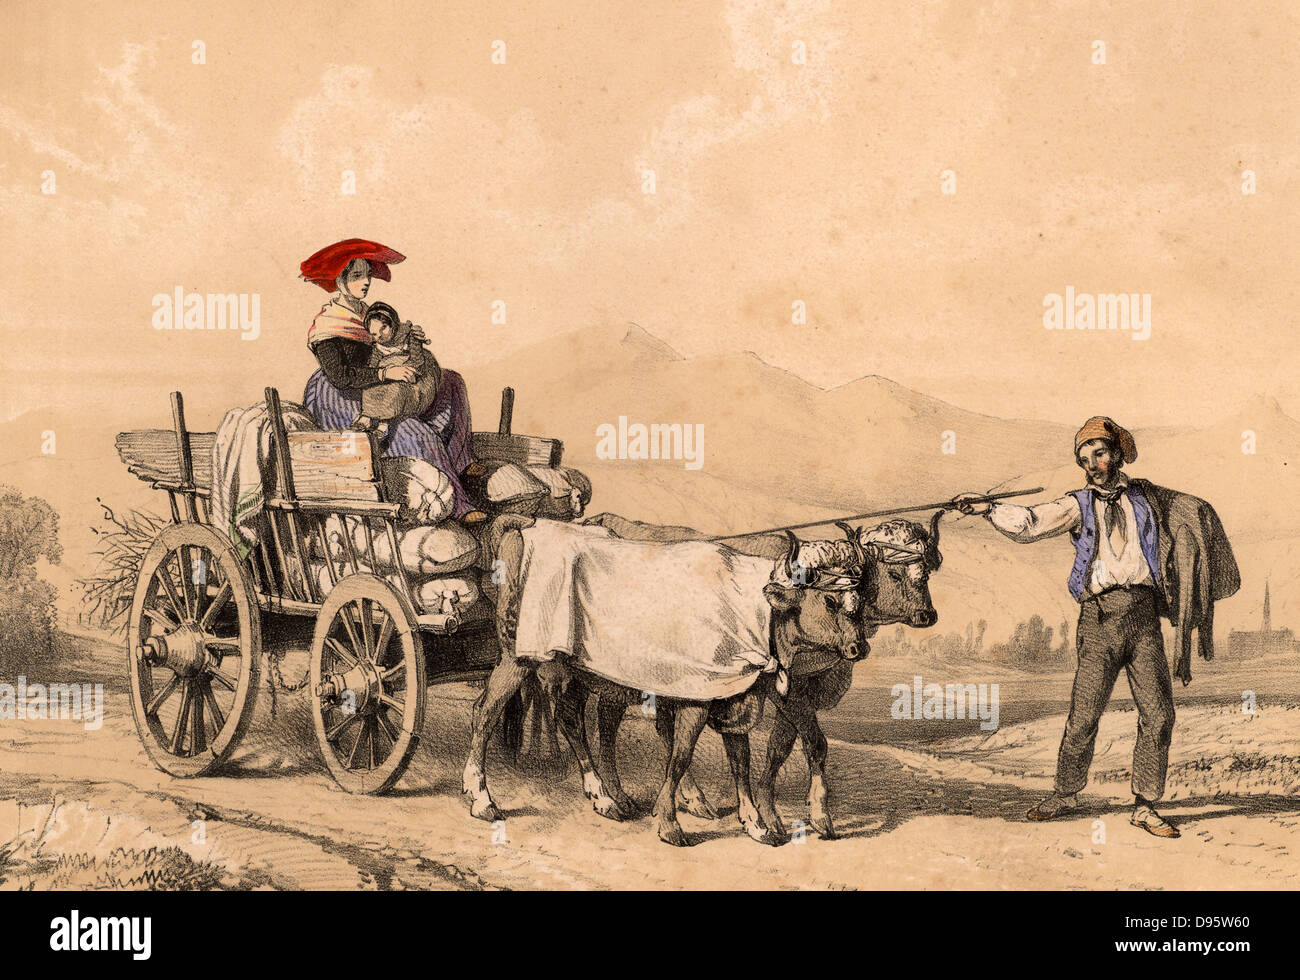 Woman and child in traditional dress riding on a cart full of sacks.  The cart is being pulled by two cows who are being gently prodded by the carter.  Near Tarbes in the French Pyrenees.  Tinted lithograph from 'Nouvelles Suite de Costumes des Pyrenees' (Paris, c1840). Stock Photo